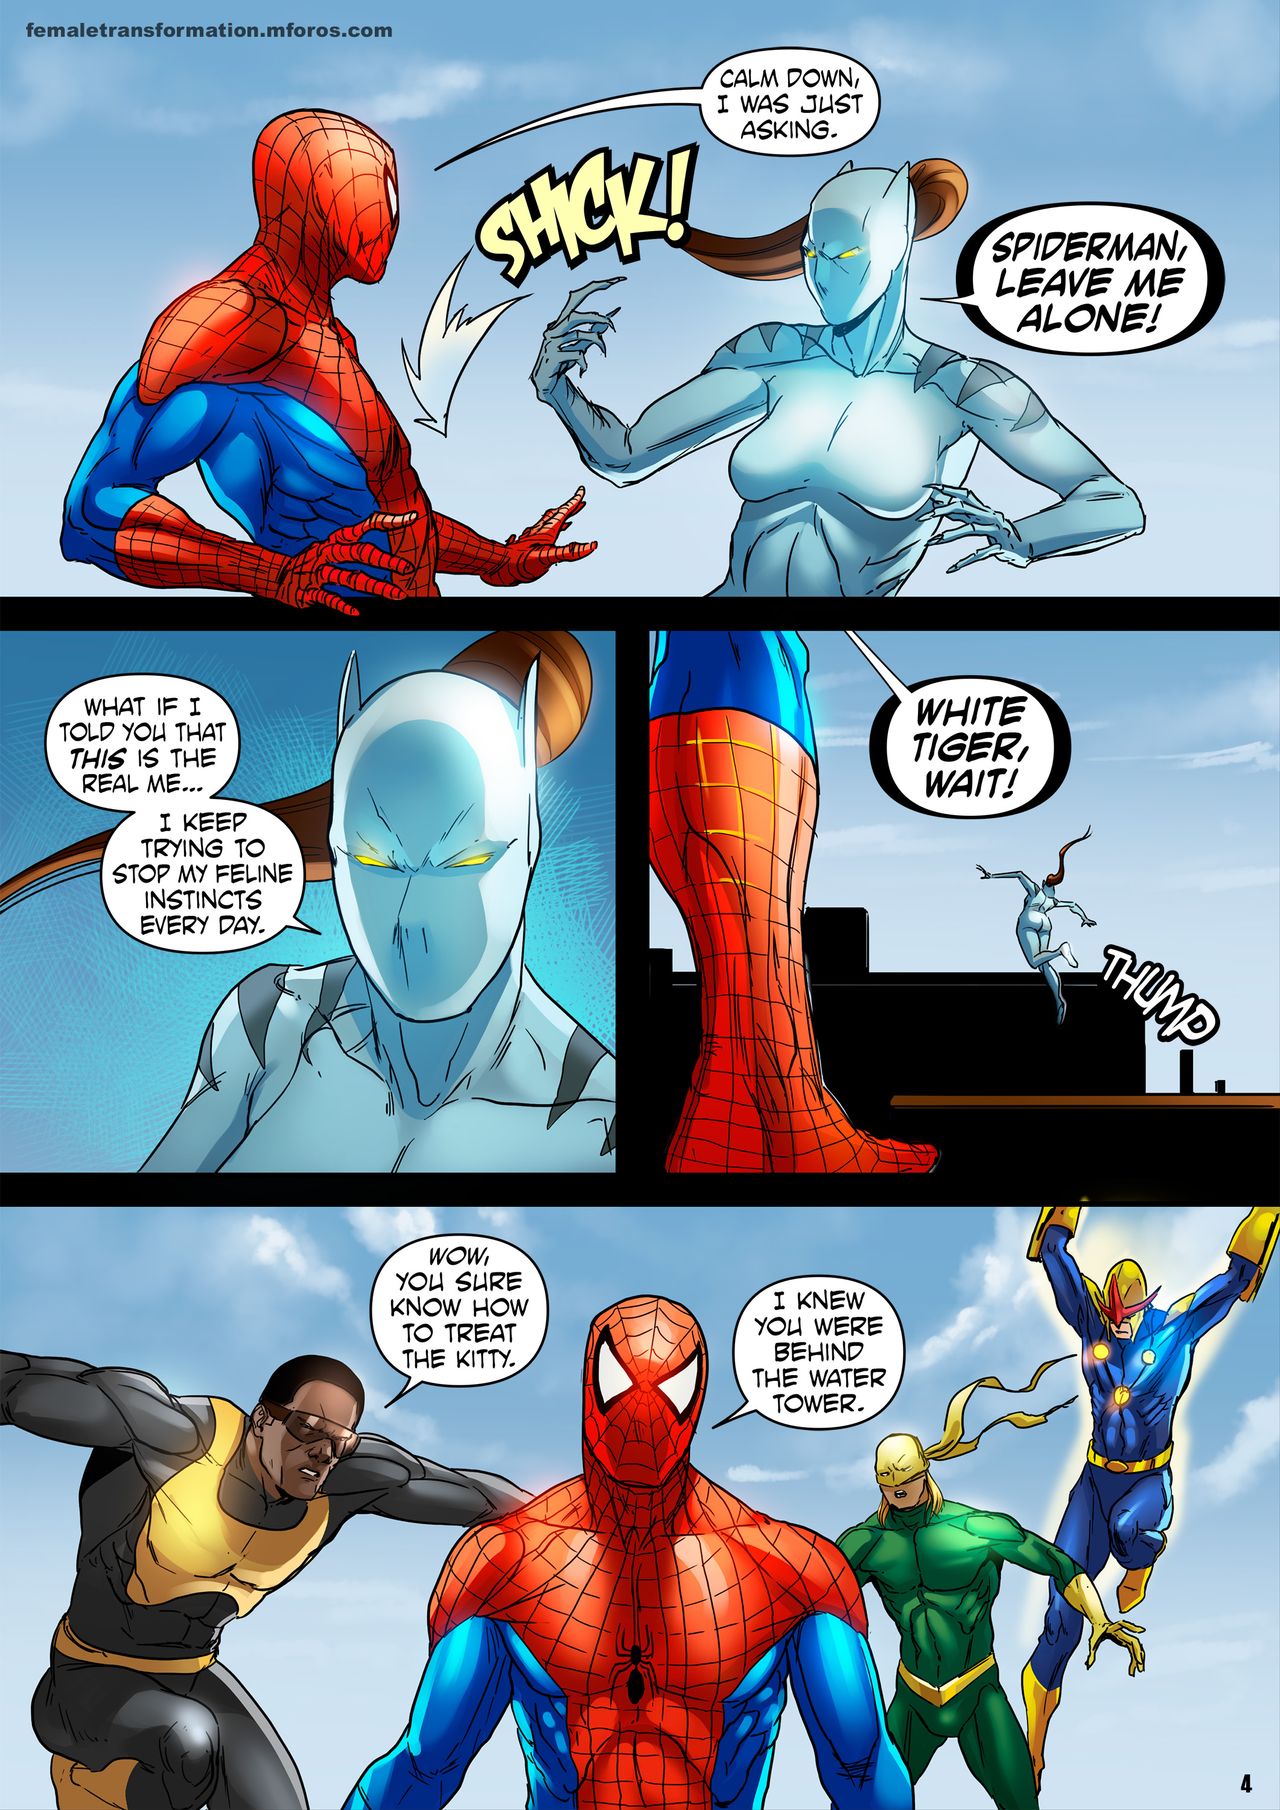 Ultimate Spiderman X White Tiger Sex - The White Tiger Amulet #2 - Page 7 - HentaiEra